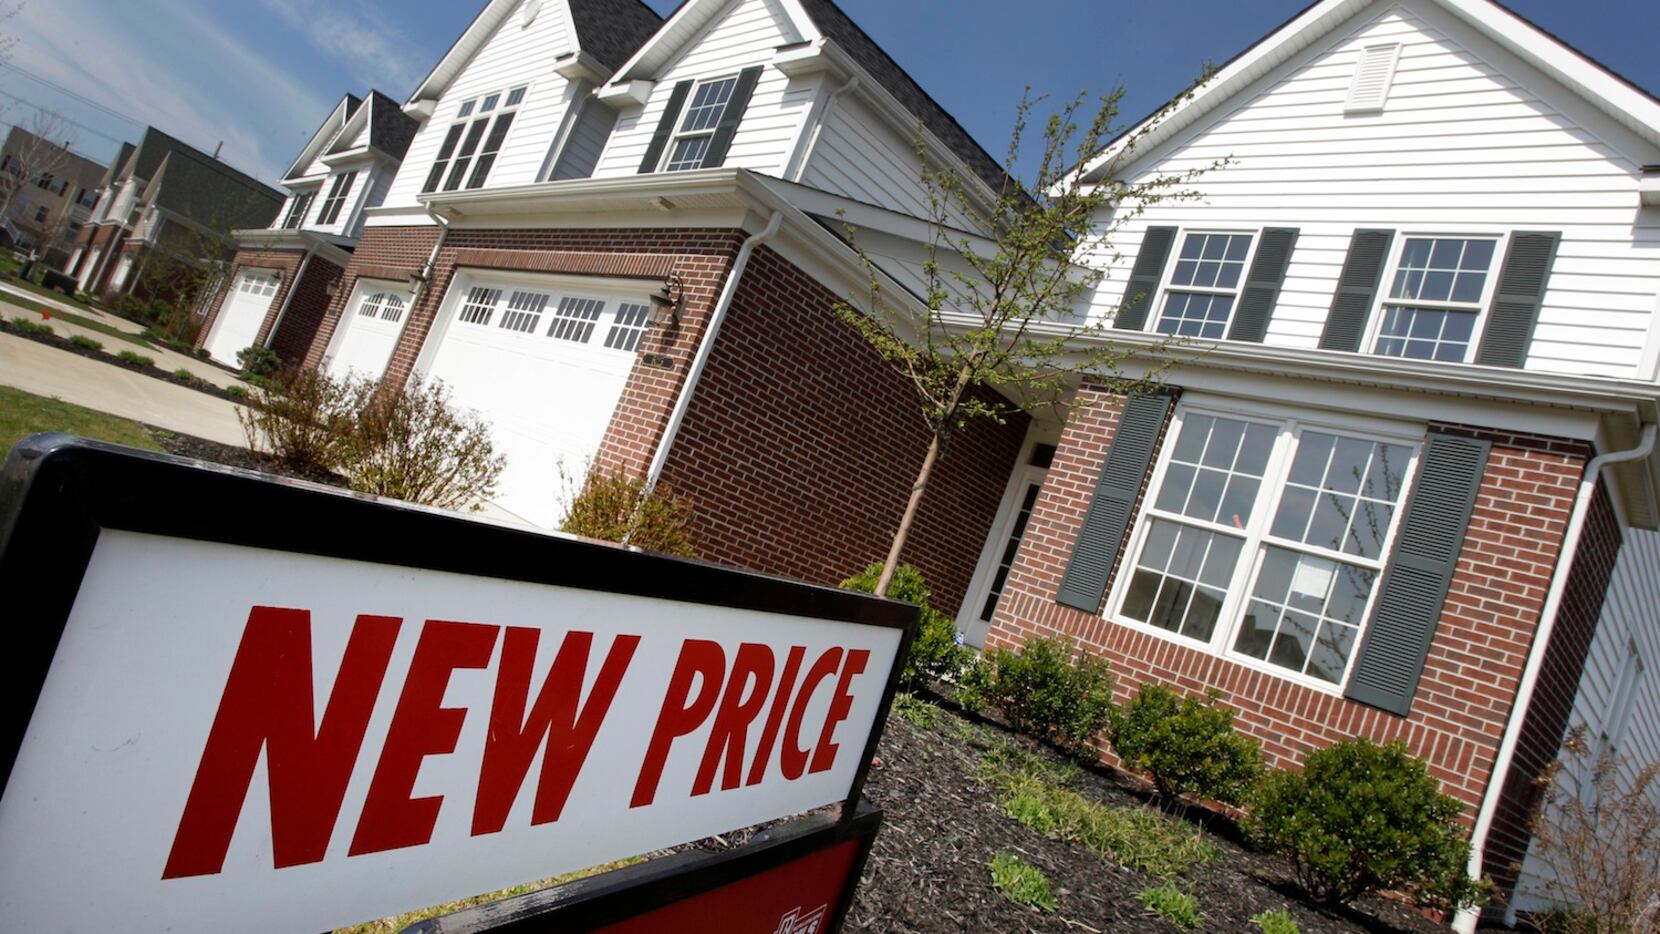 D-FW home prices are 20% to 24% over valued according to Fitch Ratings.